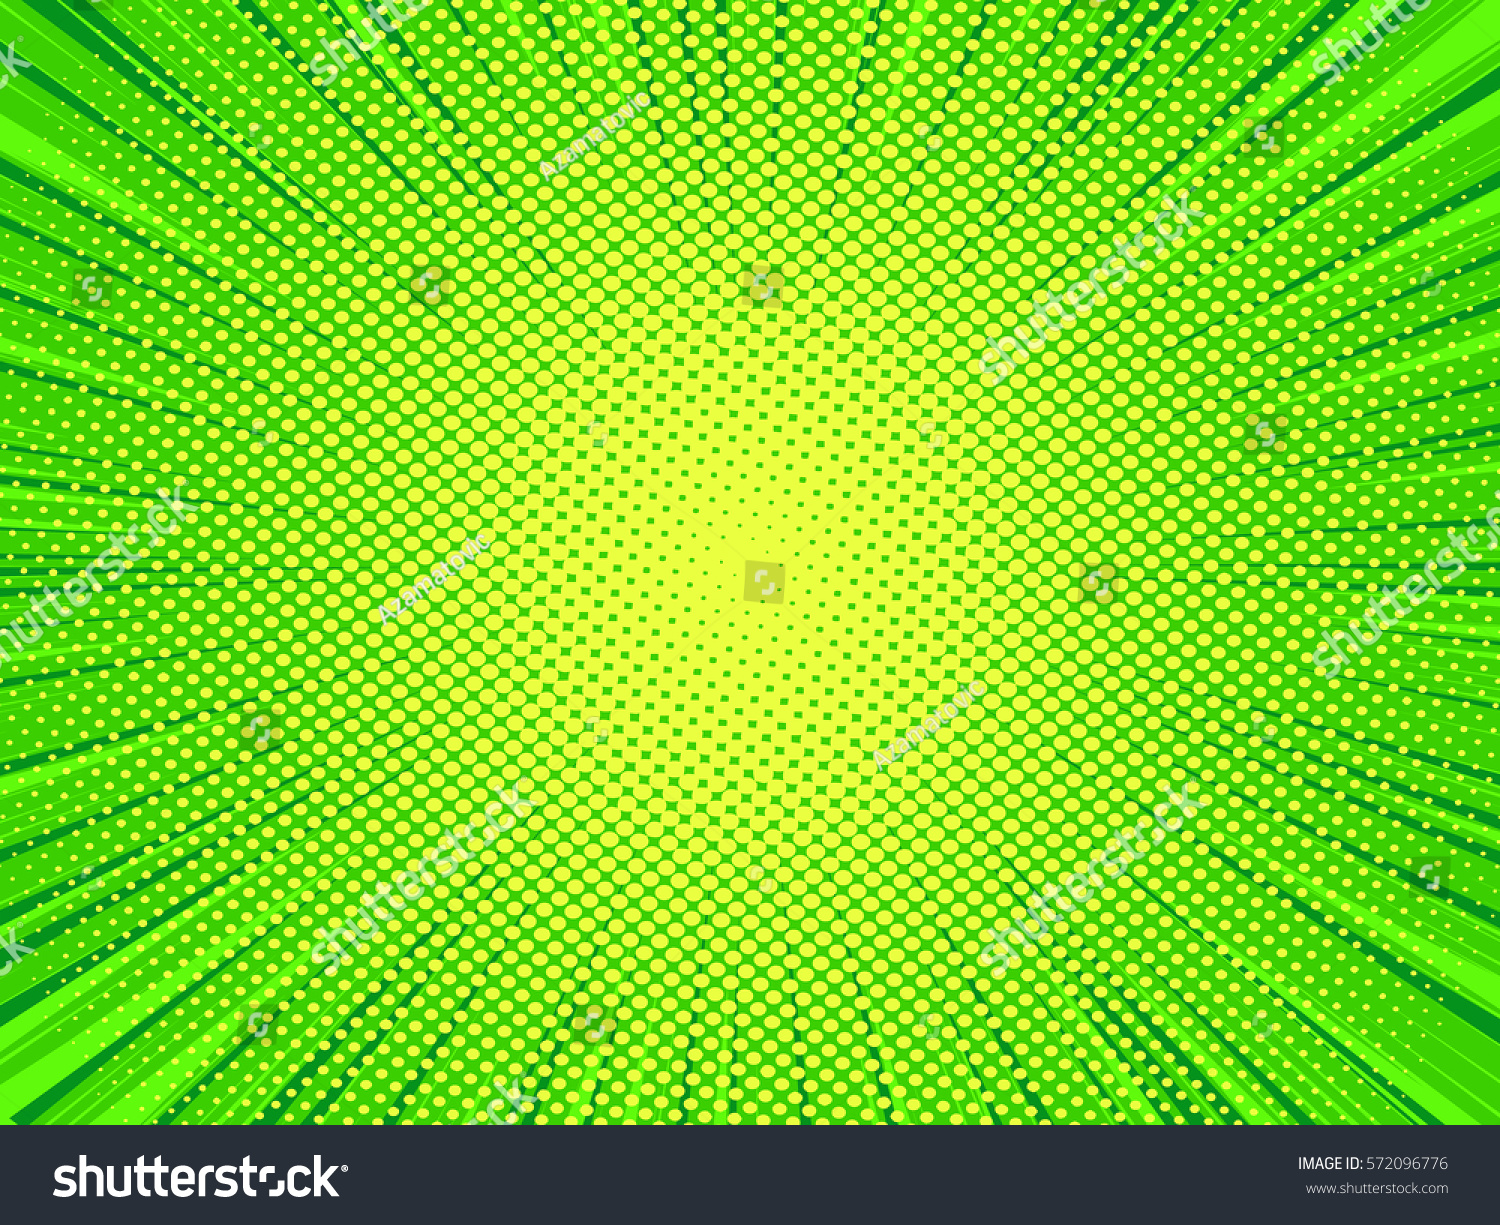 High Quality Comic Book Style Background Stock Vector 572096776